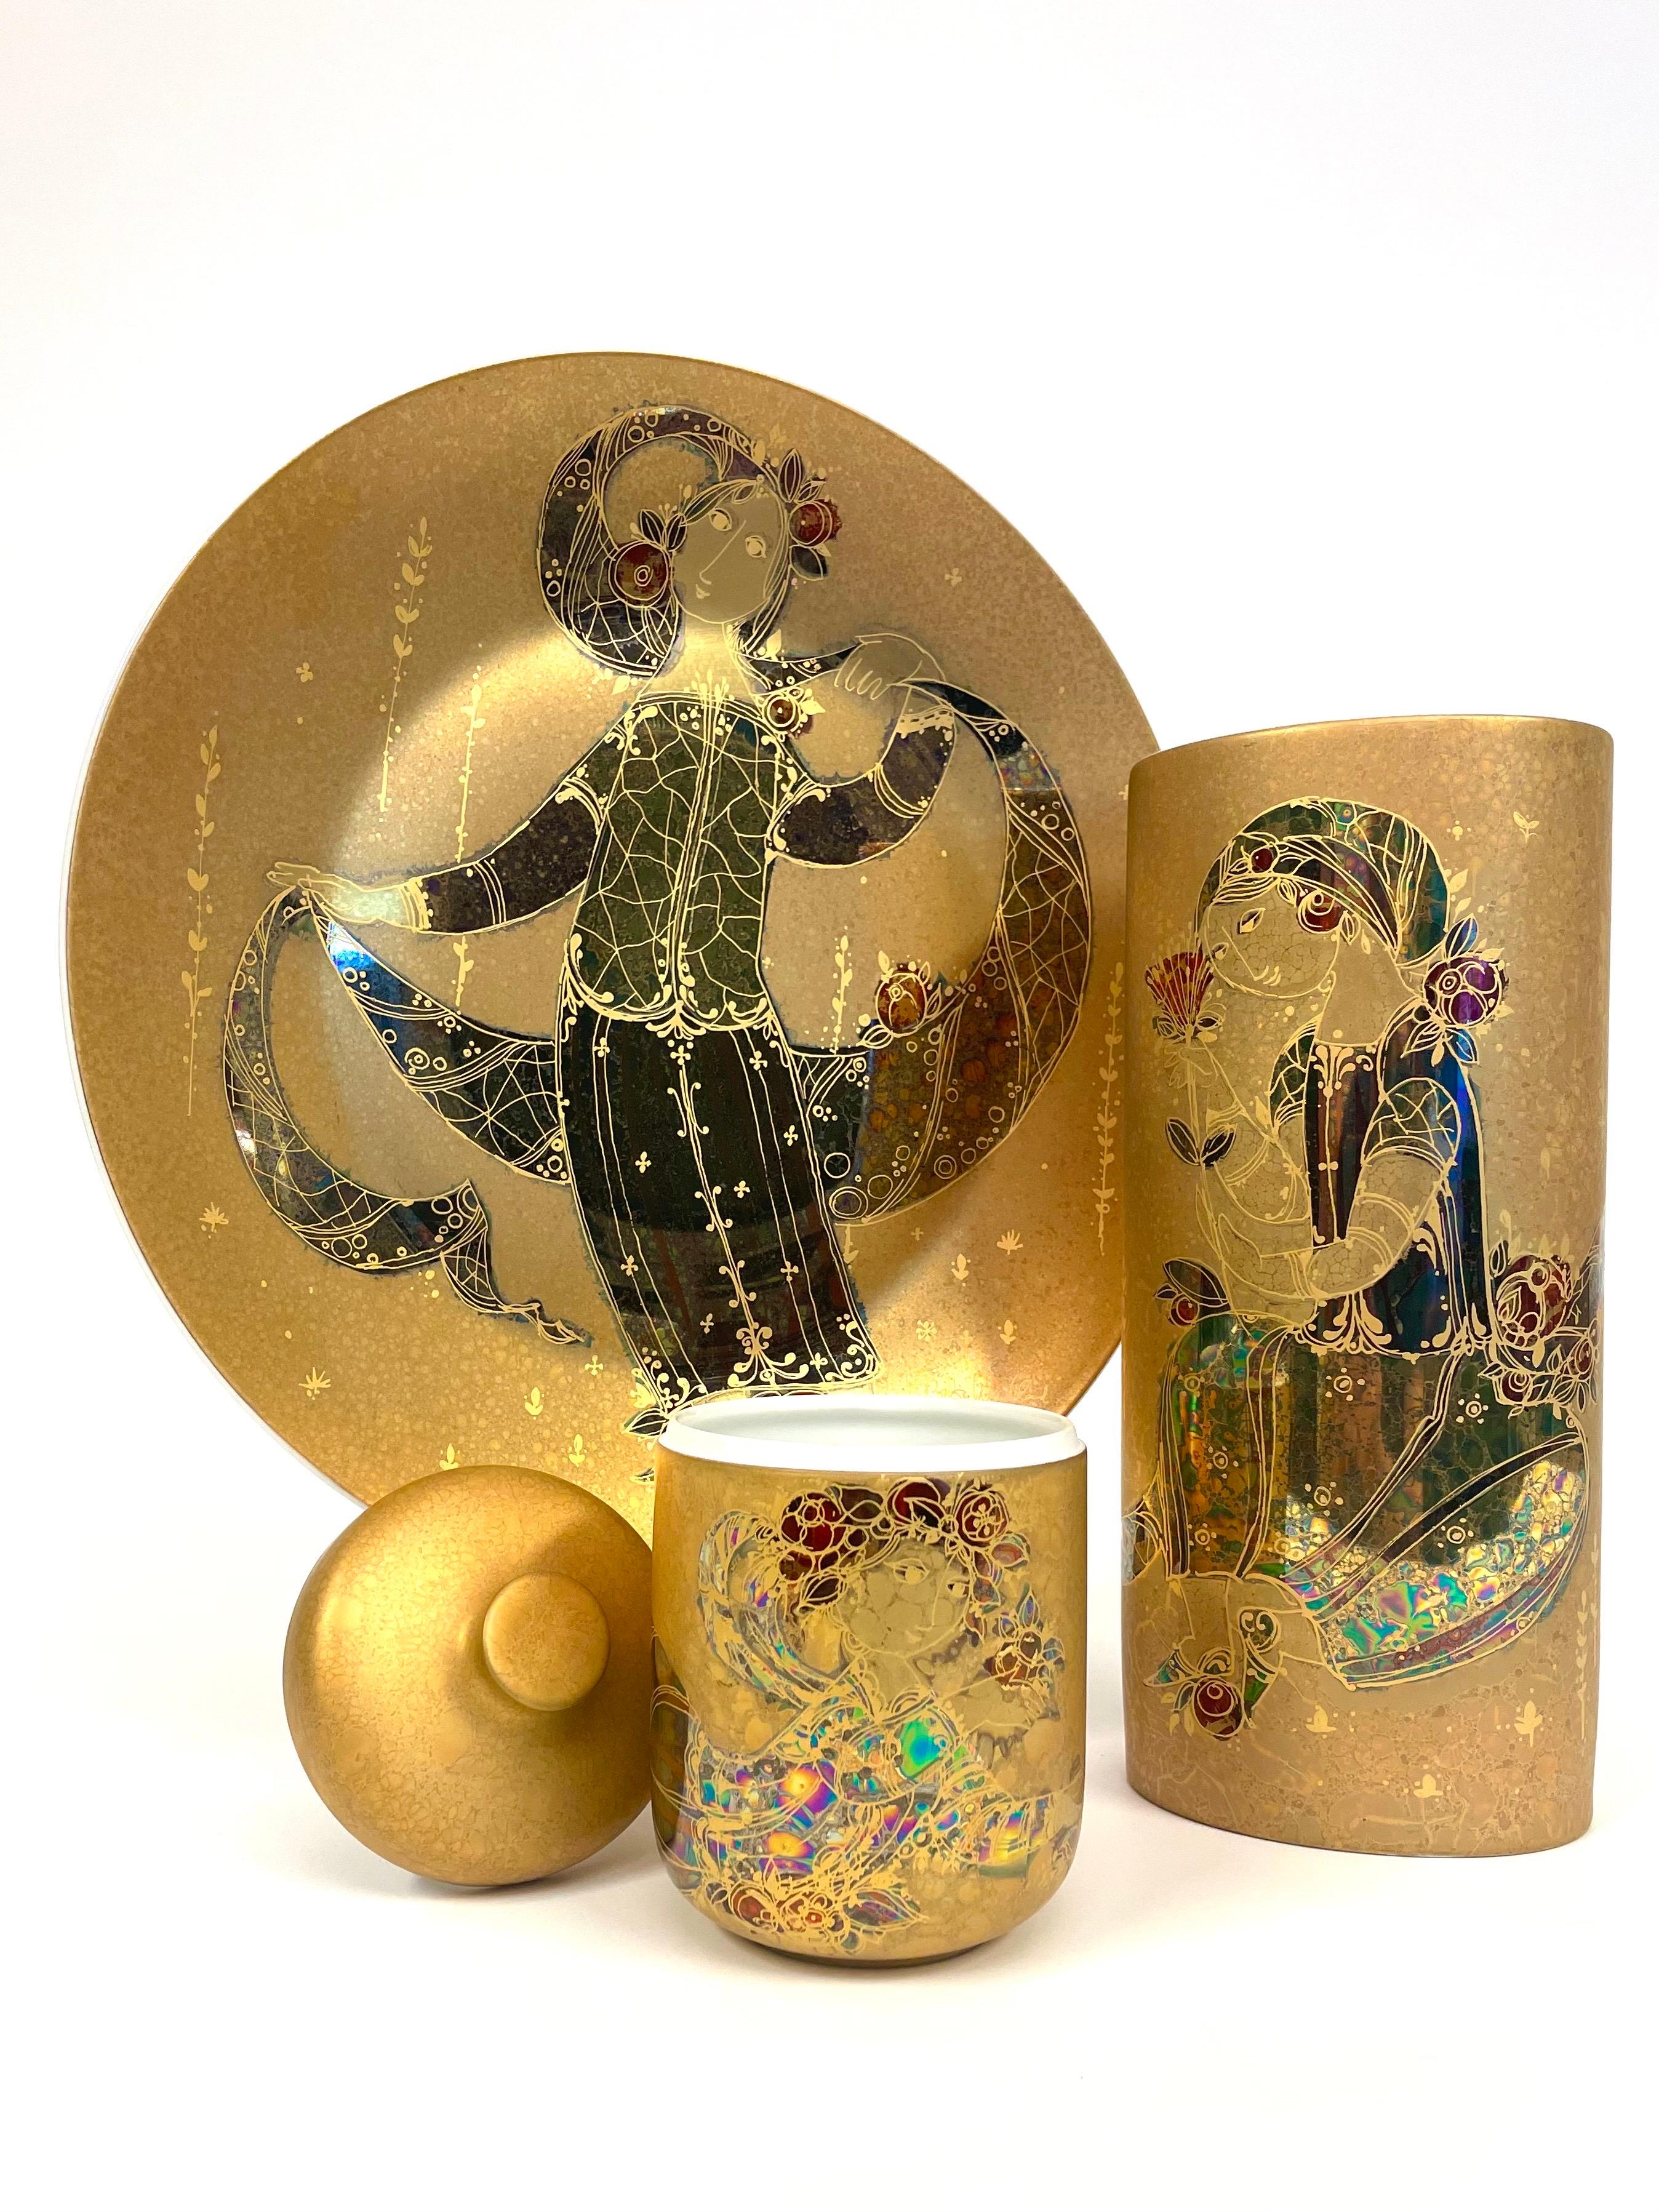 This is a German porcelain collection from Rosenthal and designed by the Dane Bjørn Wiinbladh.
It comes in three hand painted and partly metal gilded pieces consisting of a large platter, a tall oval vase and a jar with a lid.

The oval of the vase